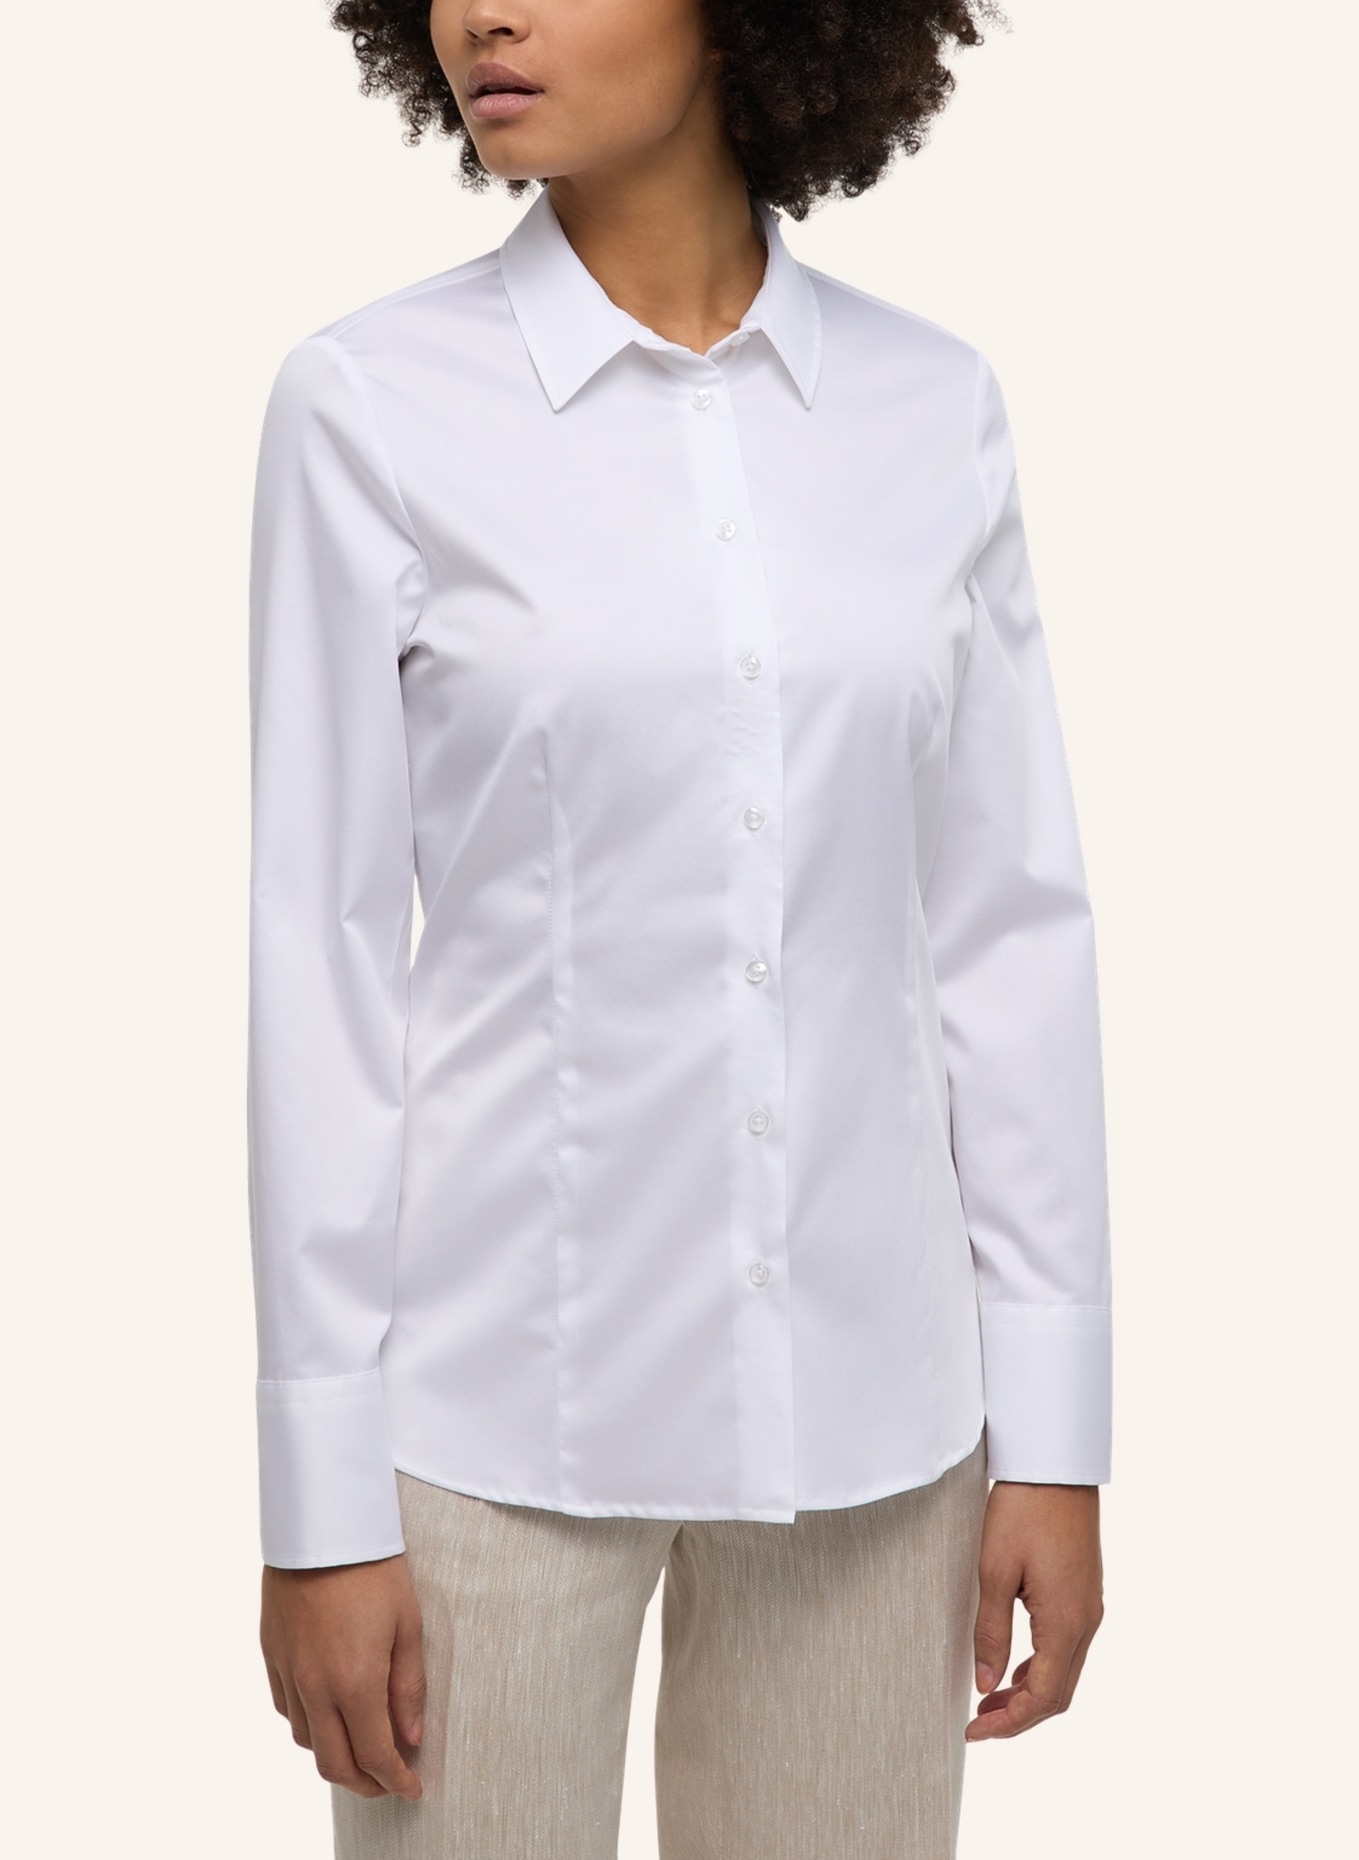 FITTED Bluse in ETERNA weiss